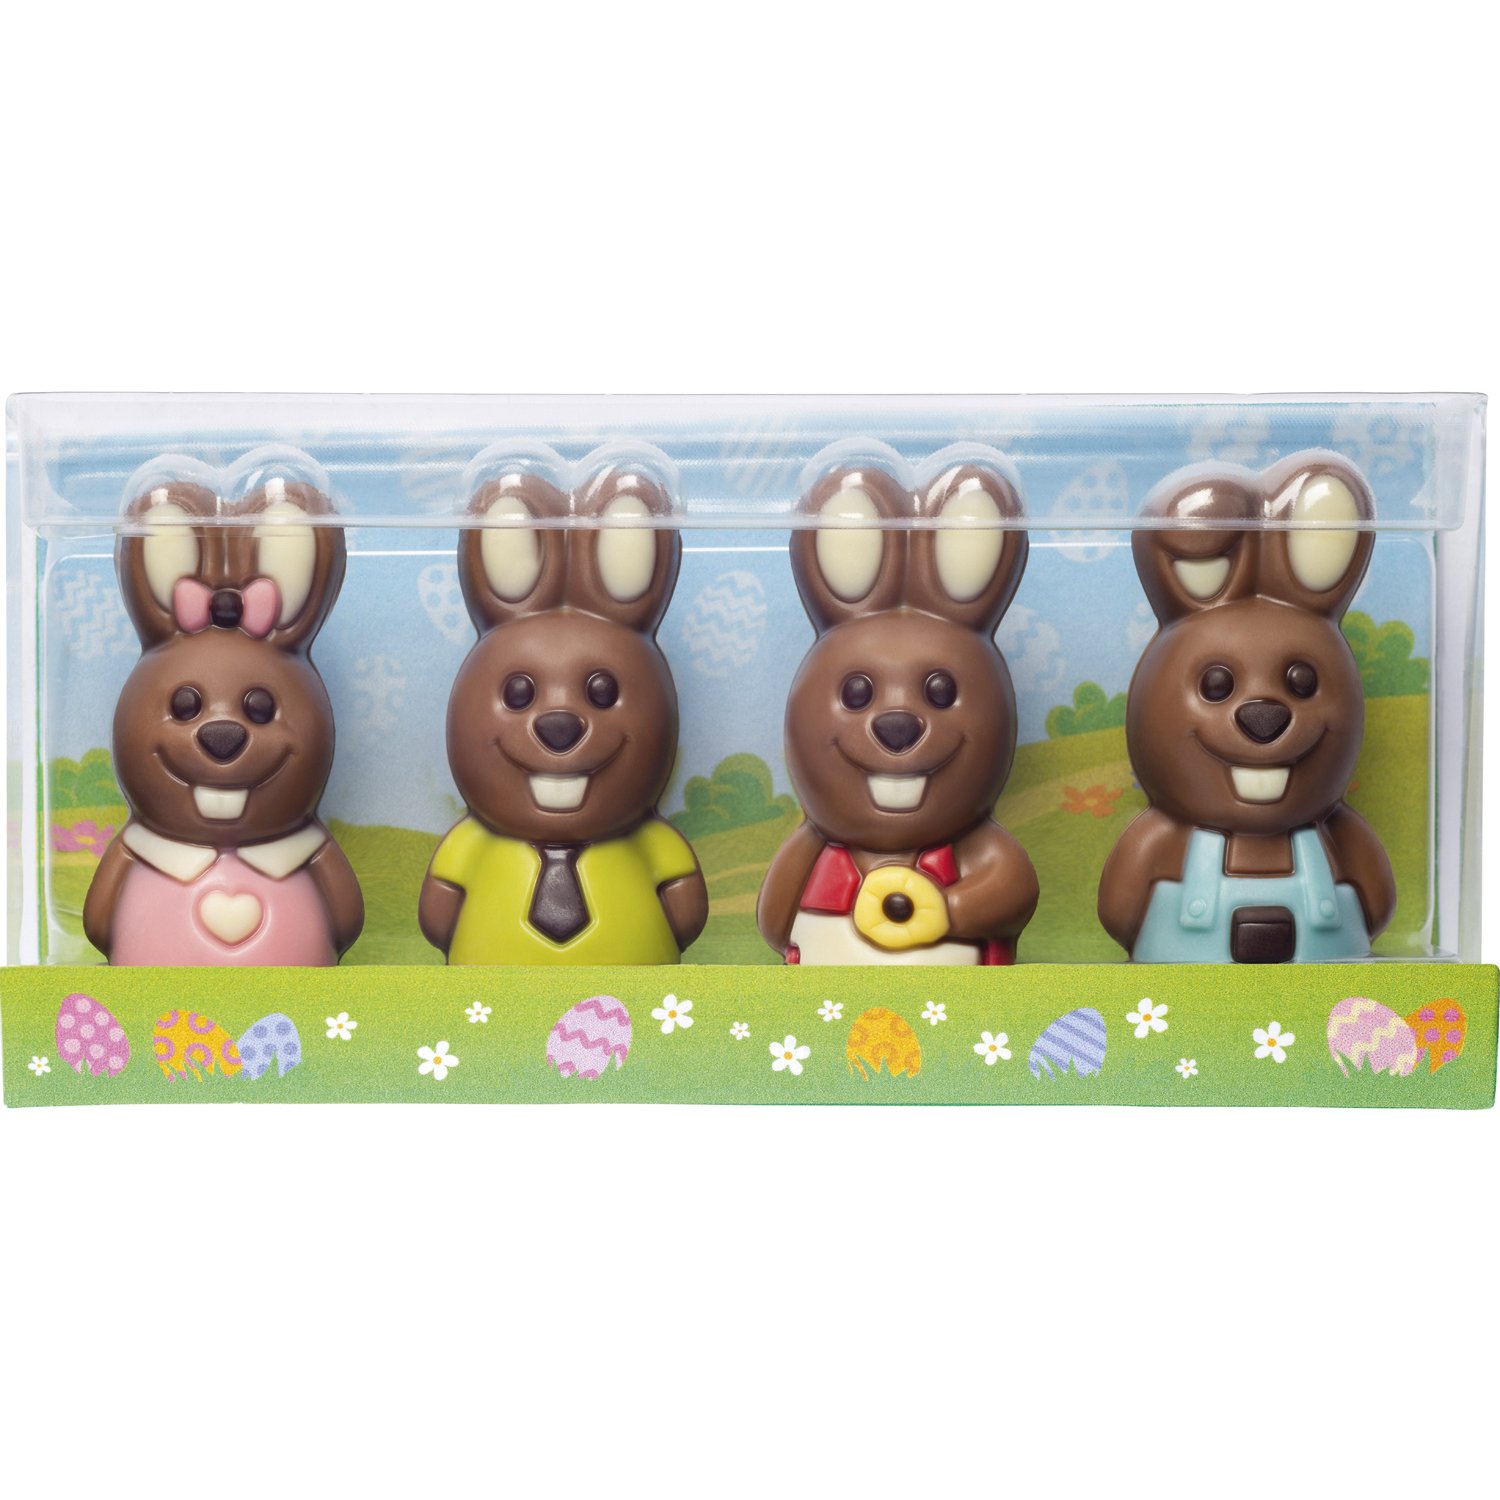 Decorated milk choc mini Easter bunnies in gift box - 65mm high - 9x40g